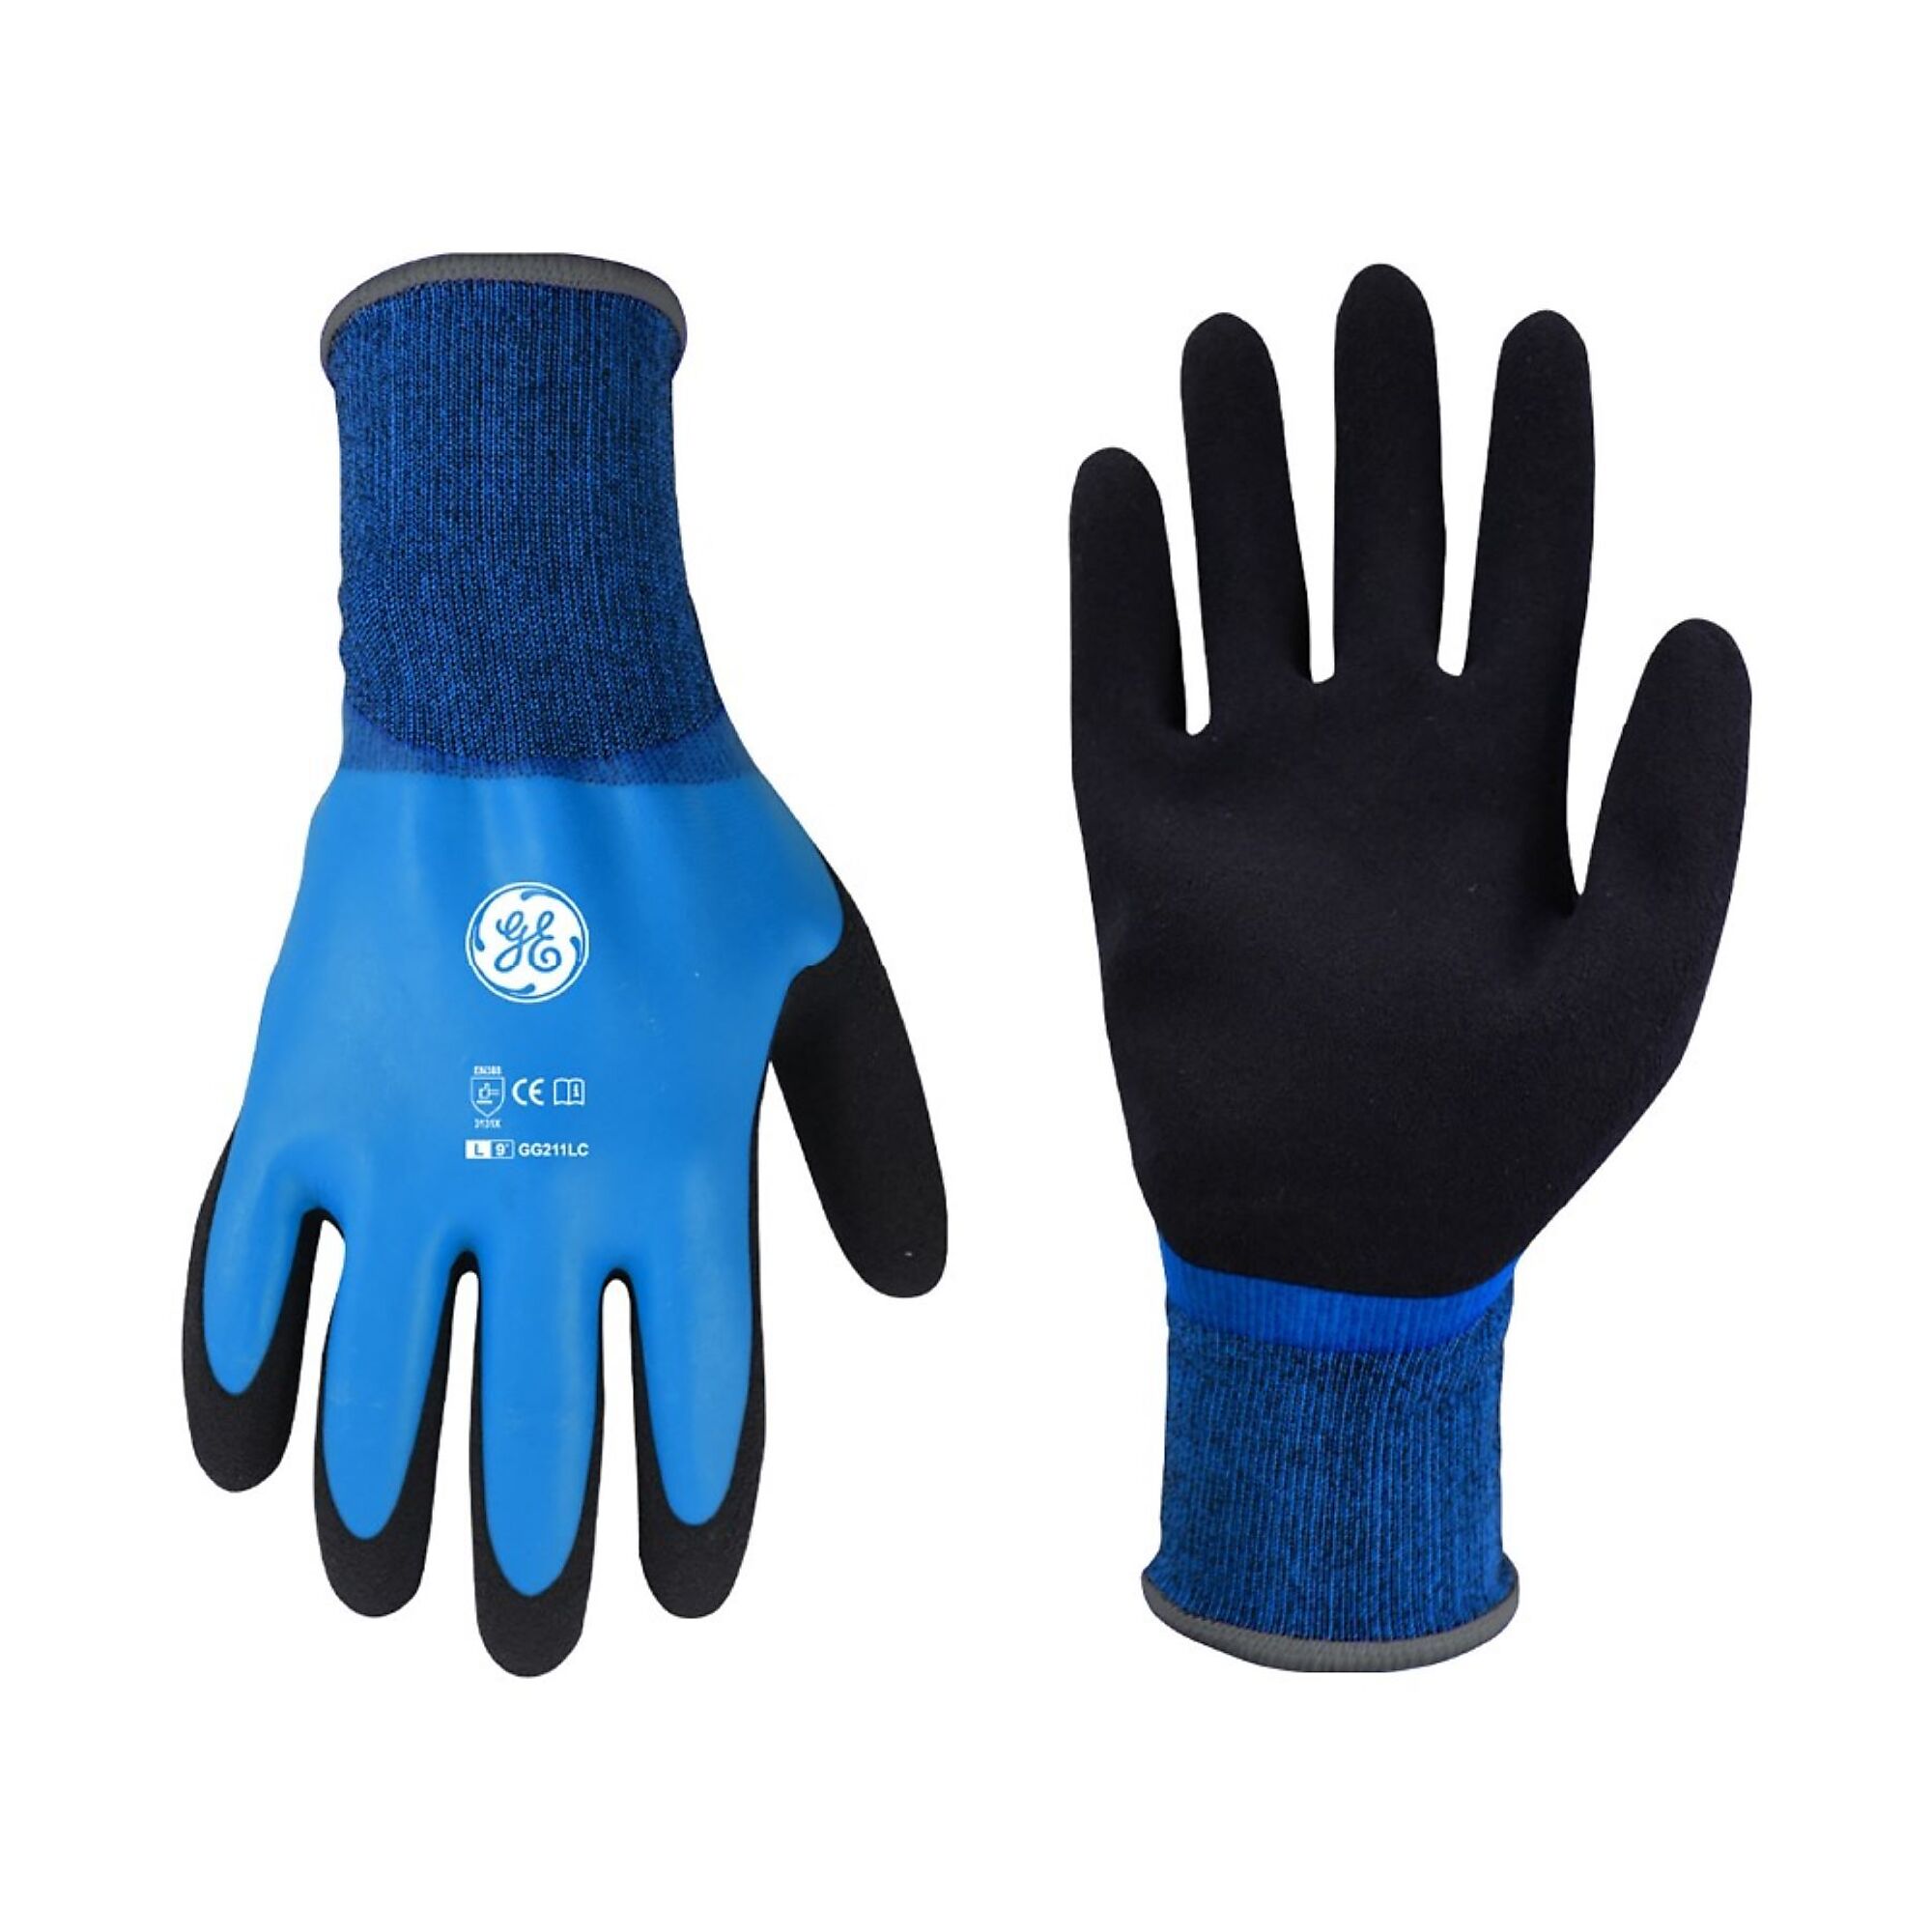 General Electric, Unisex Dipped Gloves Black/Blue L 12 pair, Size L, Included (qty.) 12, Model GG211L